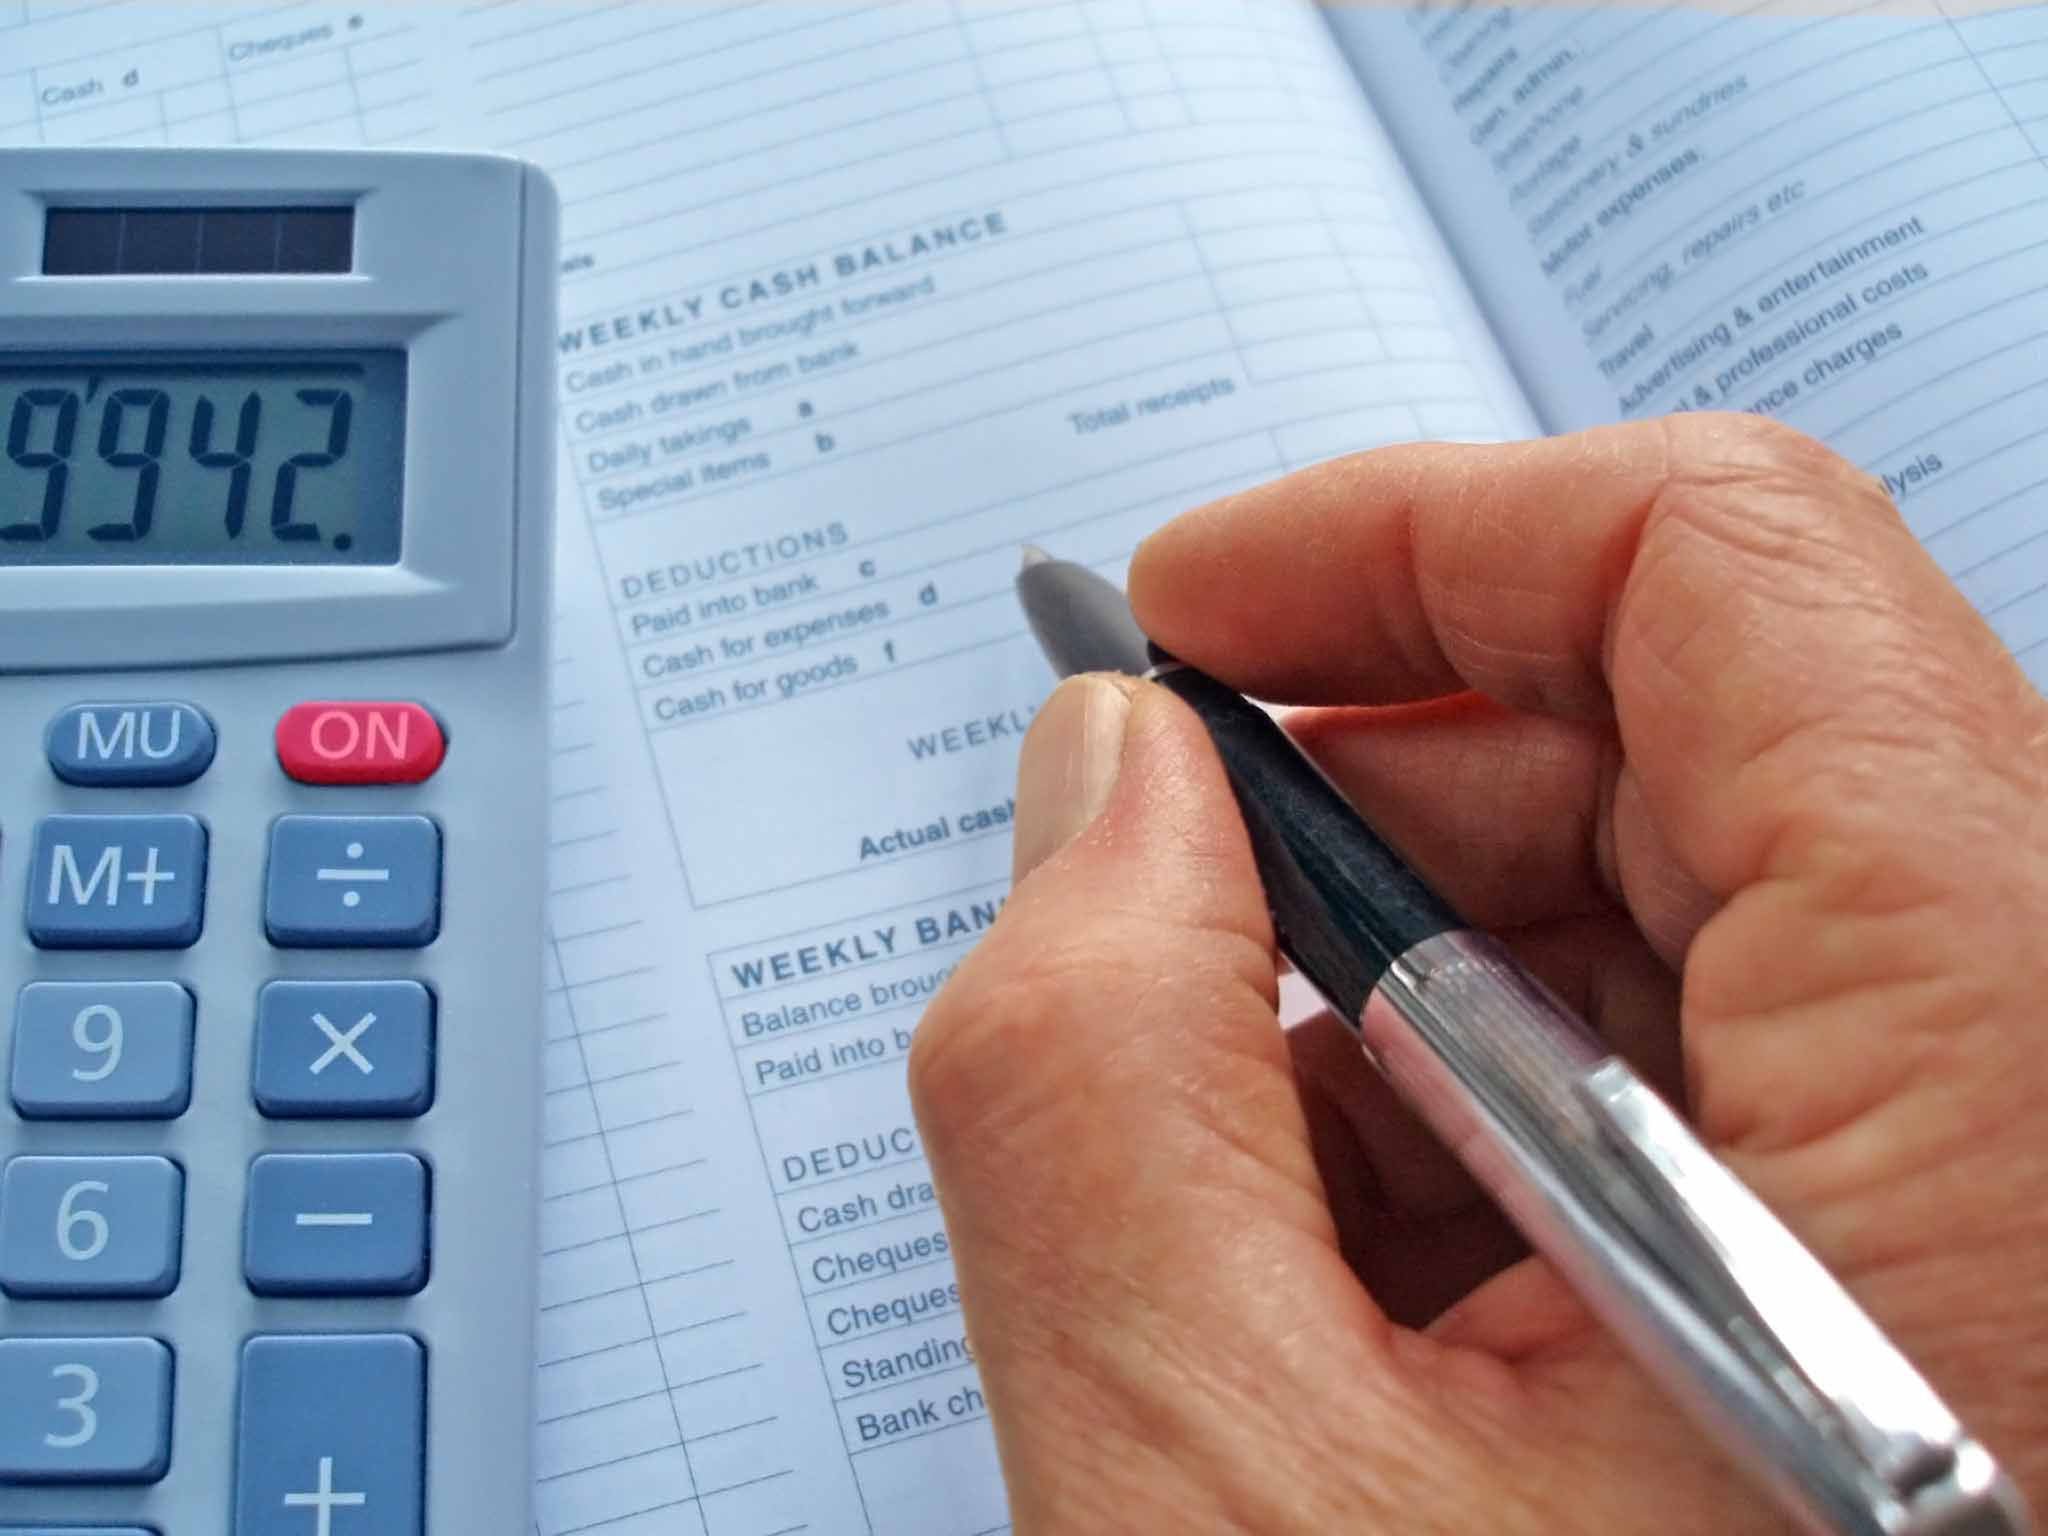 Self Assessment preparation by Alton Bookkeeping Services